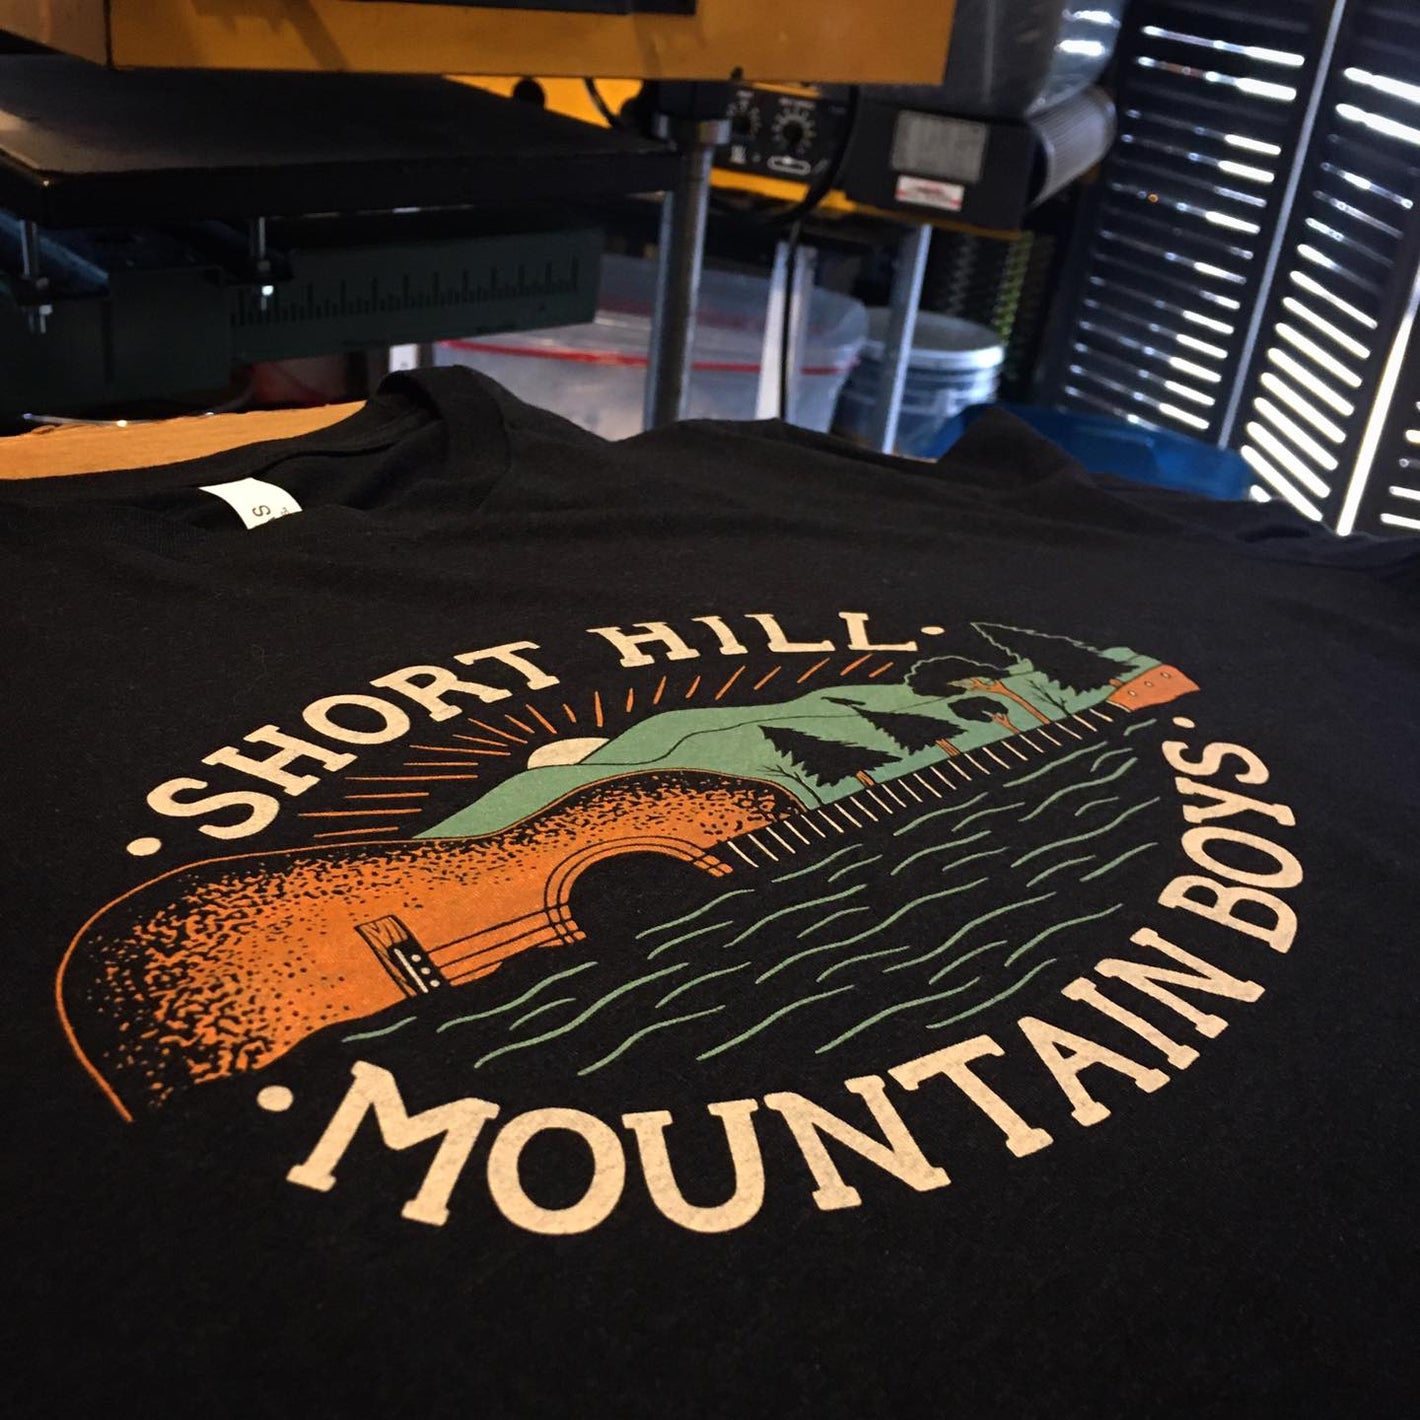 Custom screen printed t-shirts for Short Hill Mountain Boys band, features guitar. 